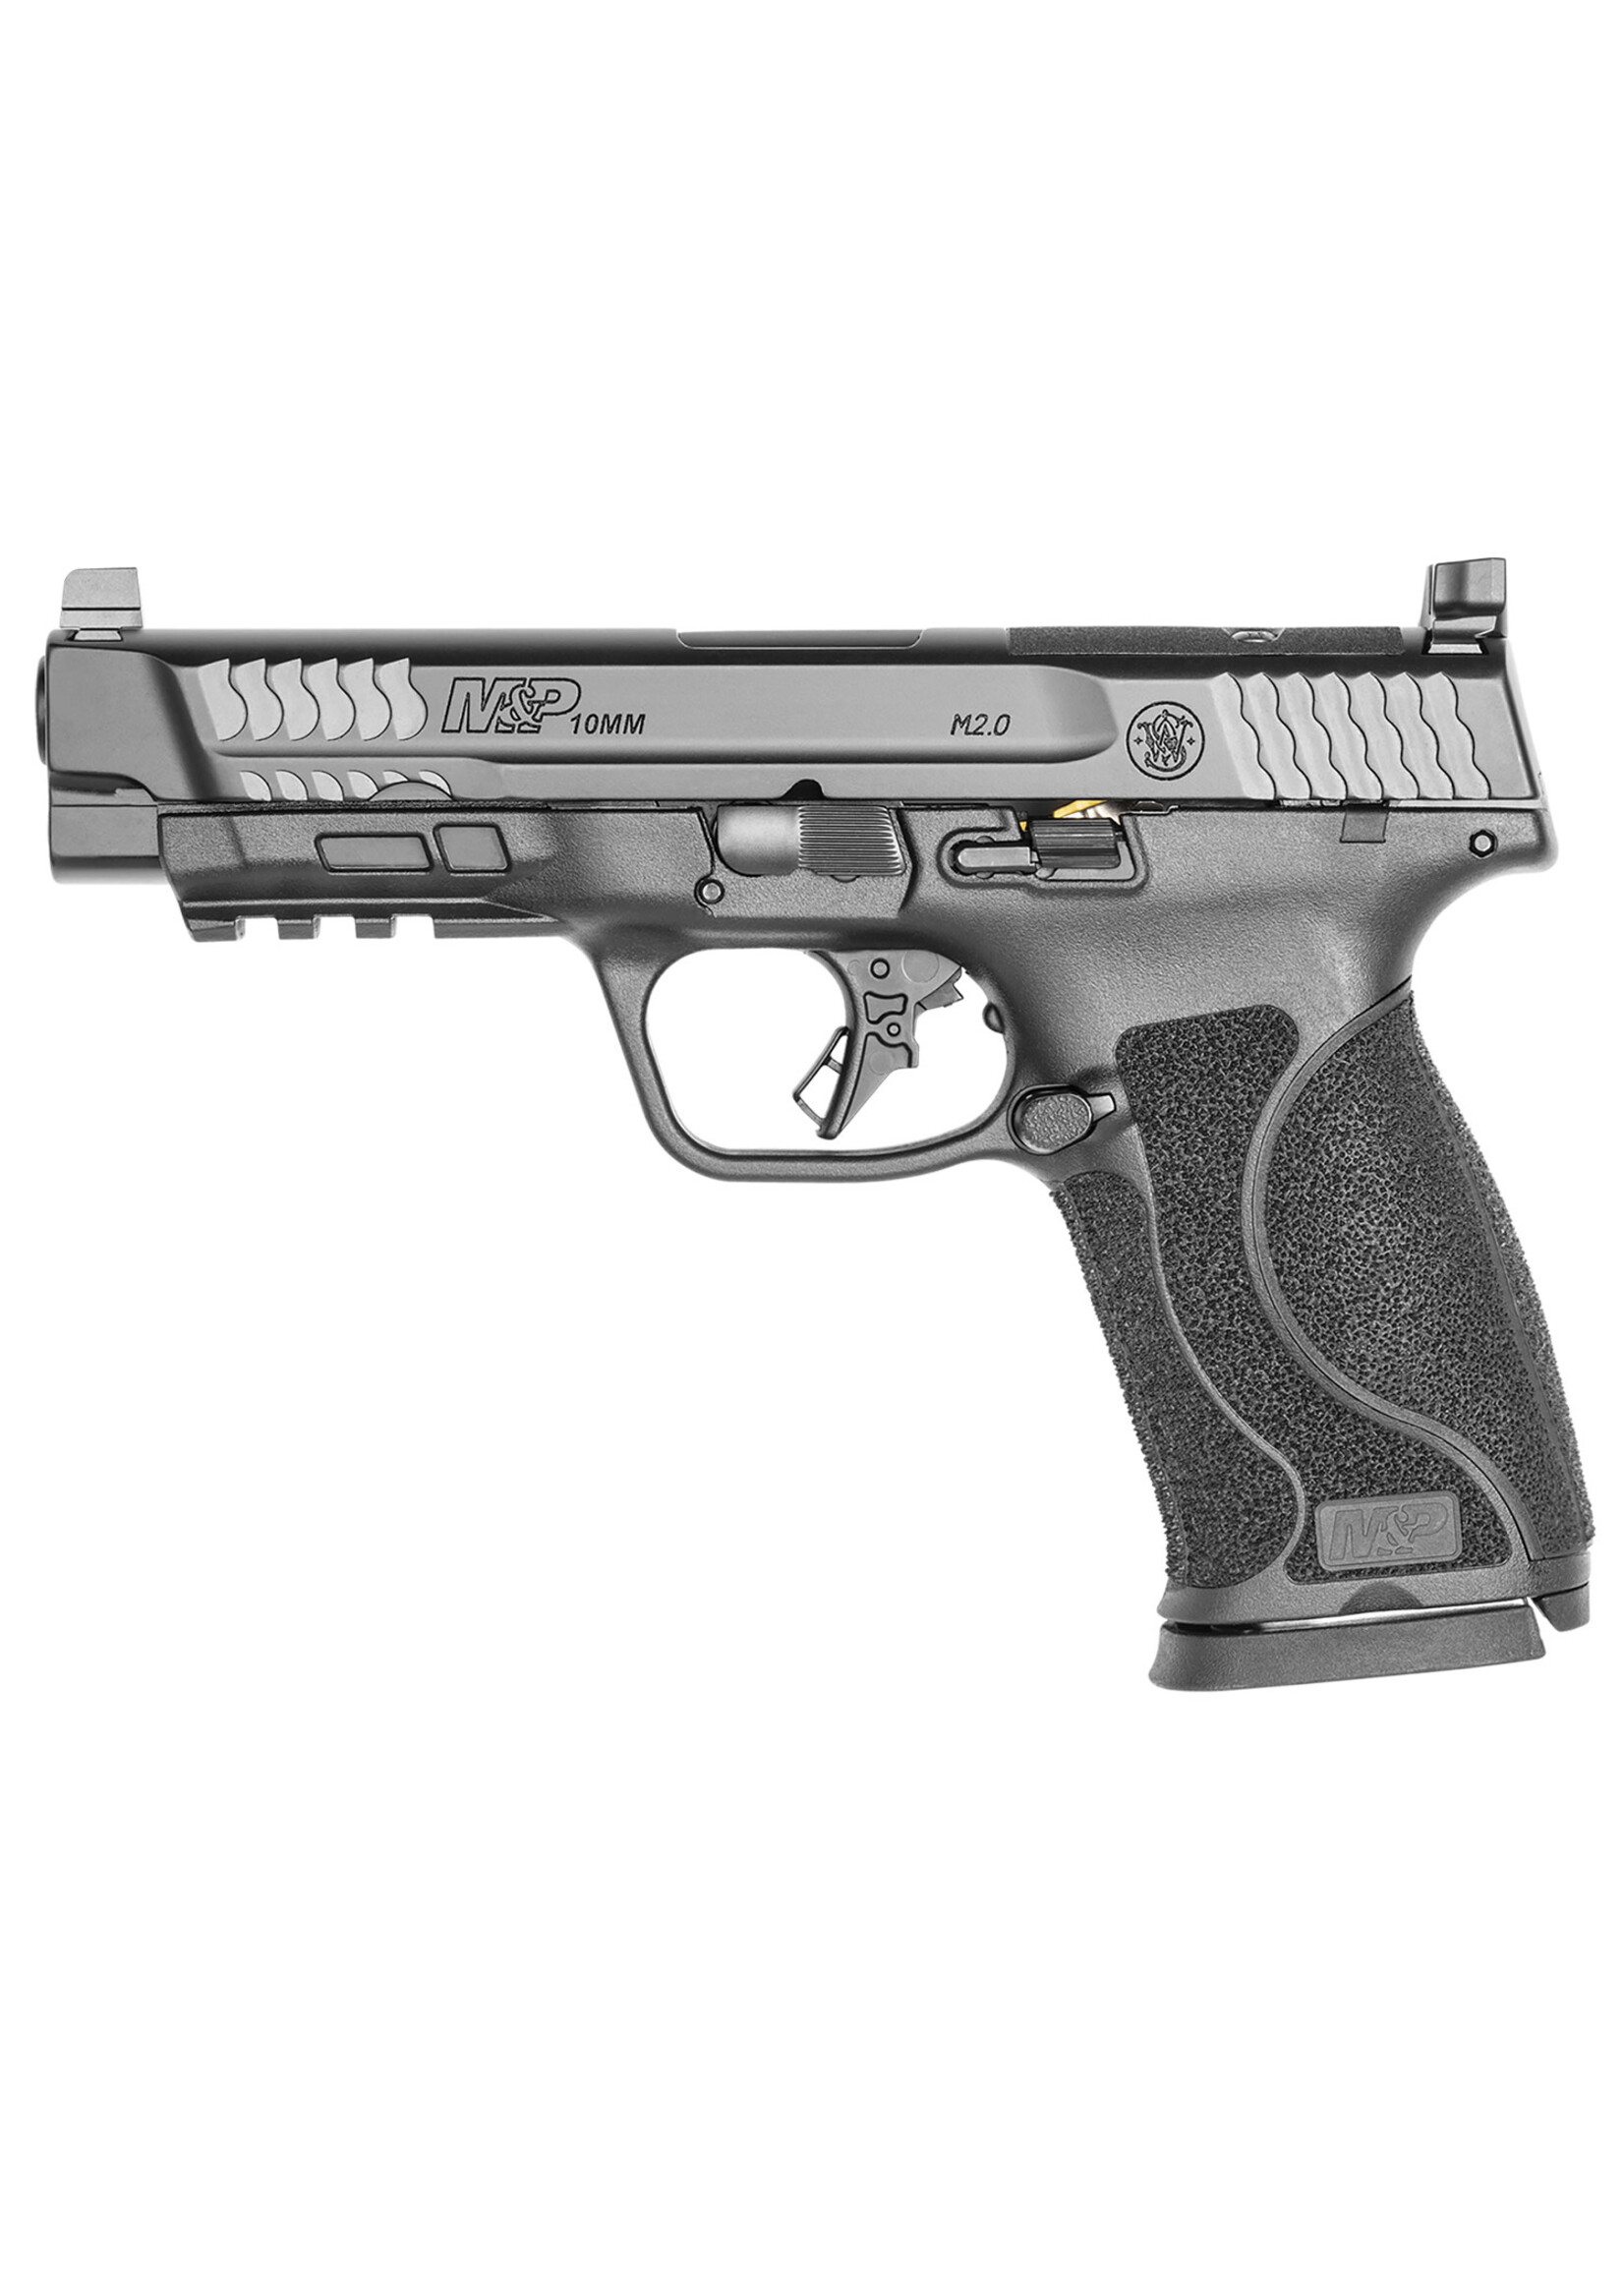 Smith and Wesson (S&W) Smith & Wesson 13387 M&P M2.0 Full Size 10mm Auto 15+1 4.60" Black Armornite Stainless Steel Barrel & Optic Cut/Serrated Stainless Steel Slide, Matte Black Polymer Frame w/Picatinny Rail